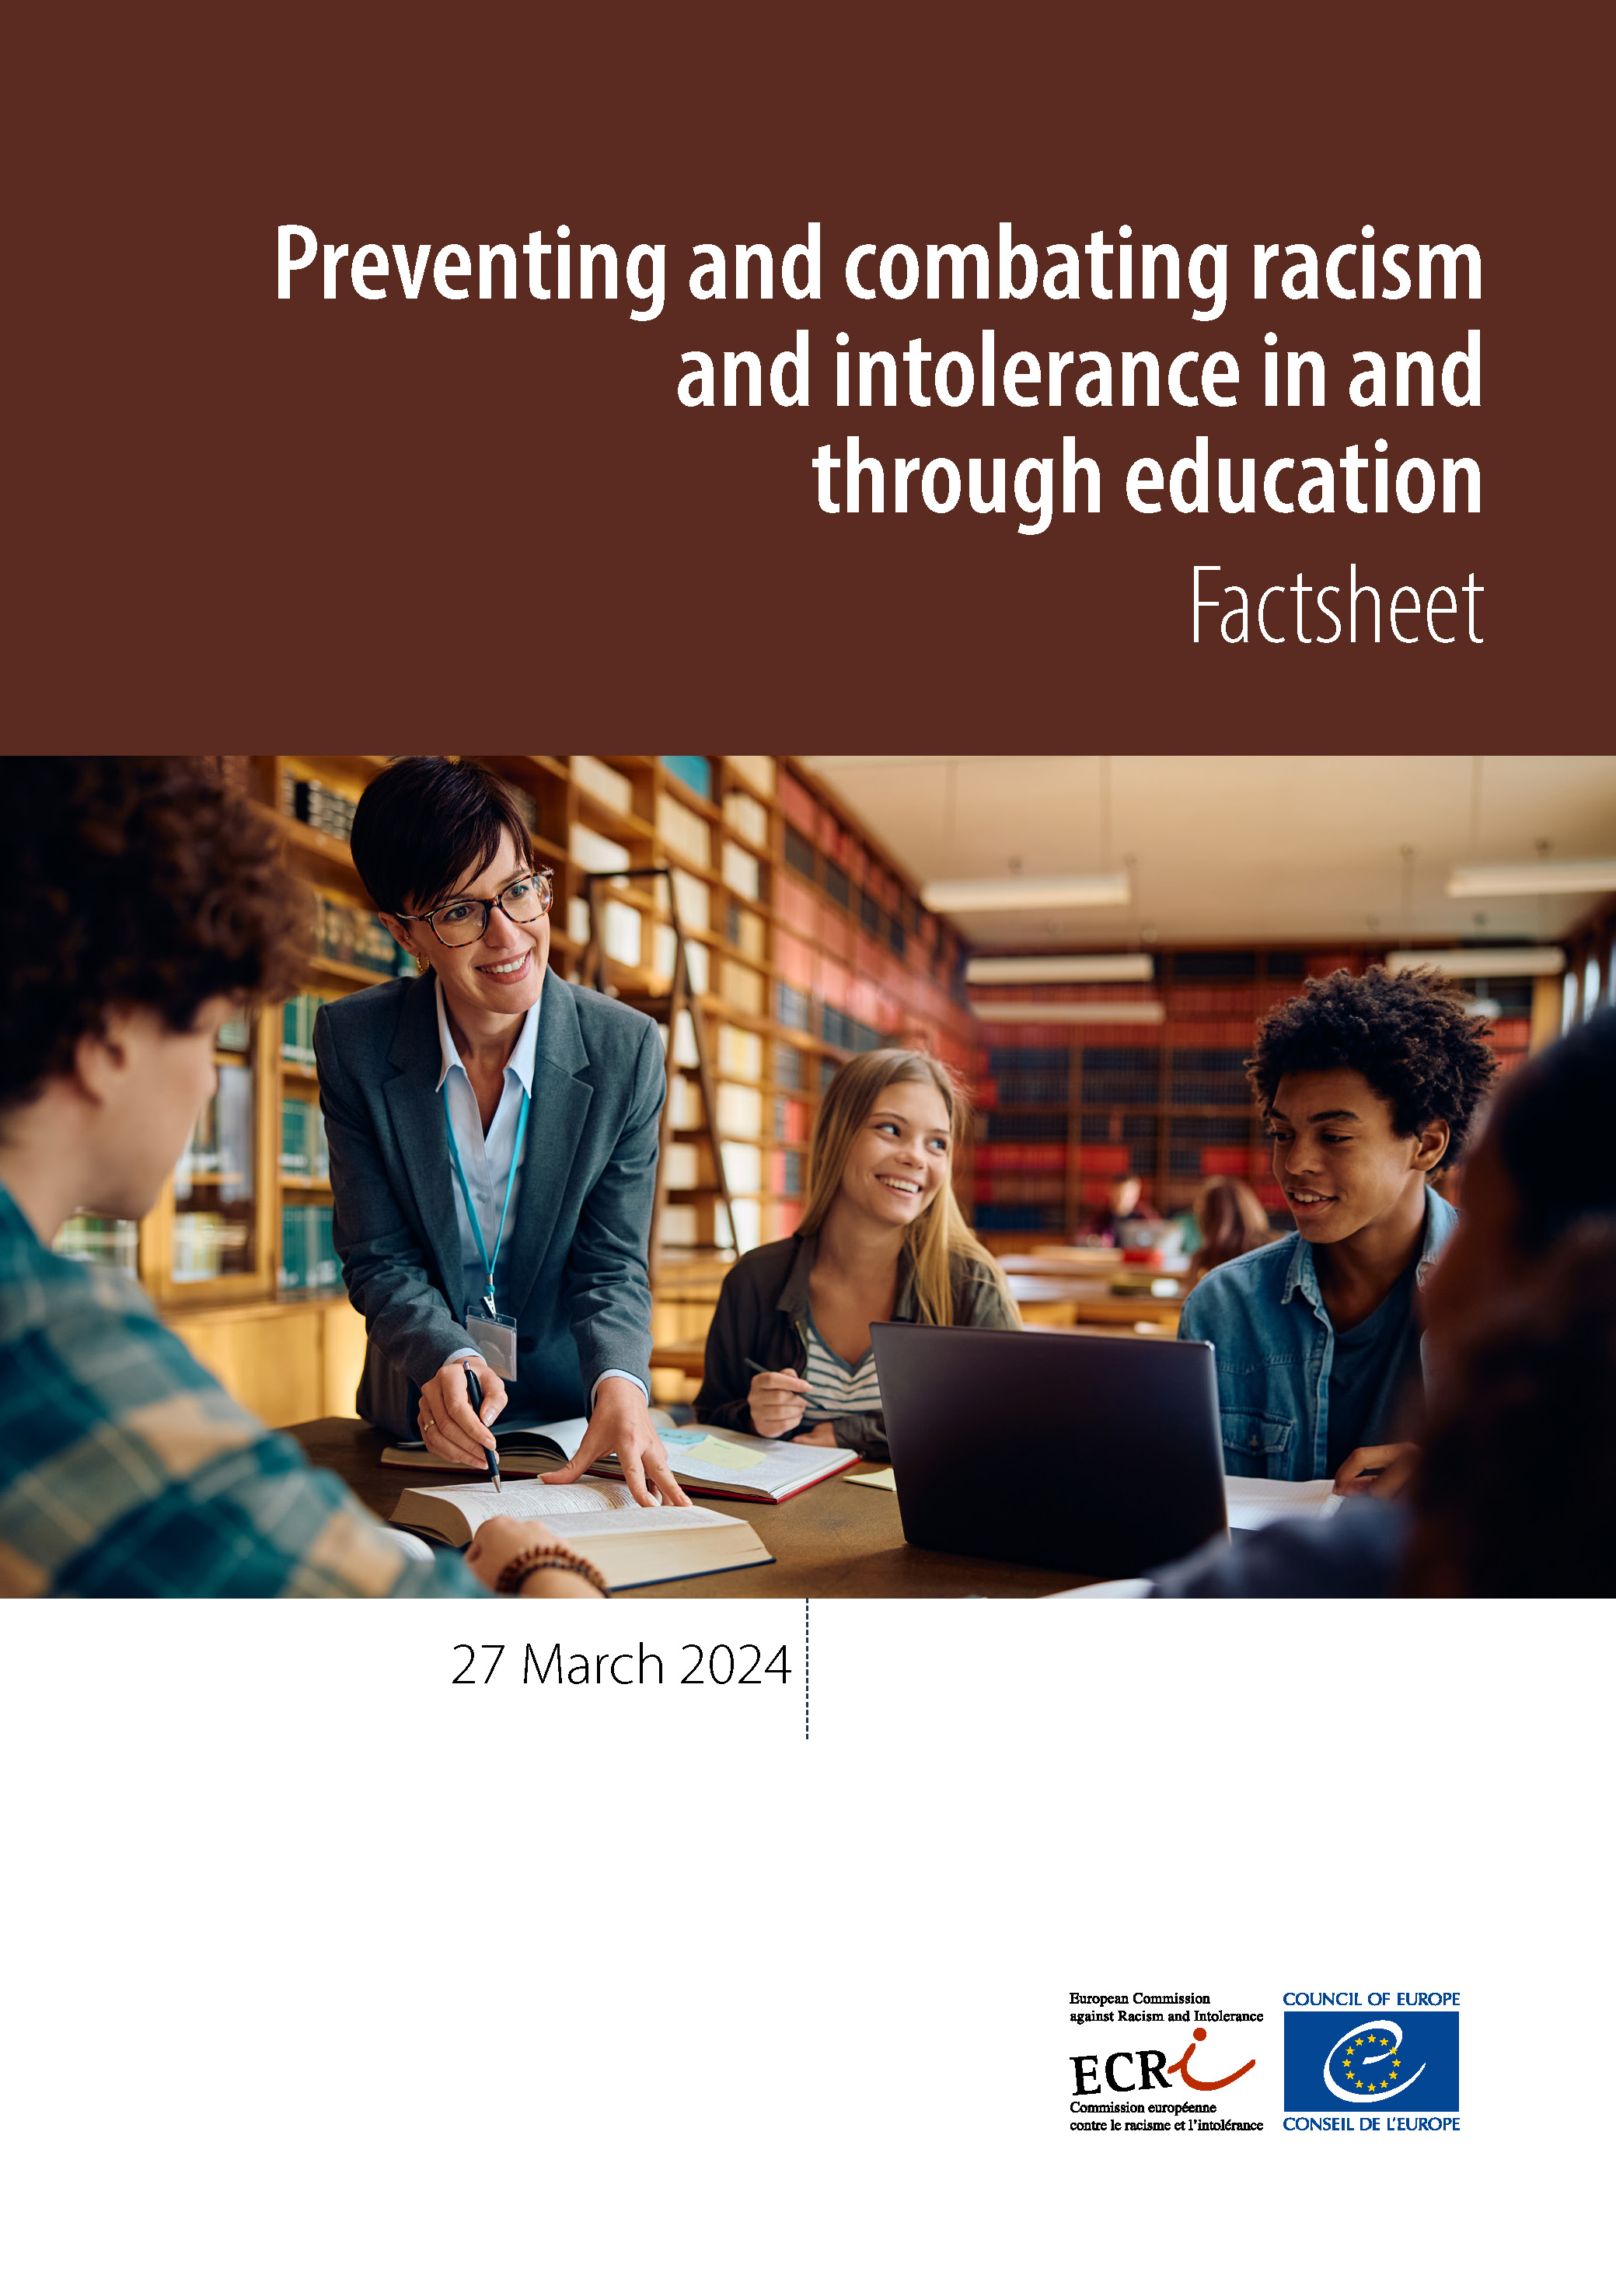 Preventing and combating racism and intolerance in and through education